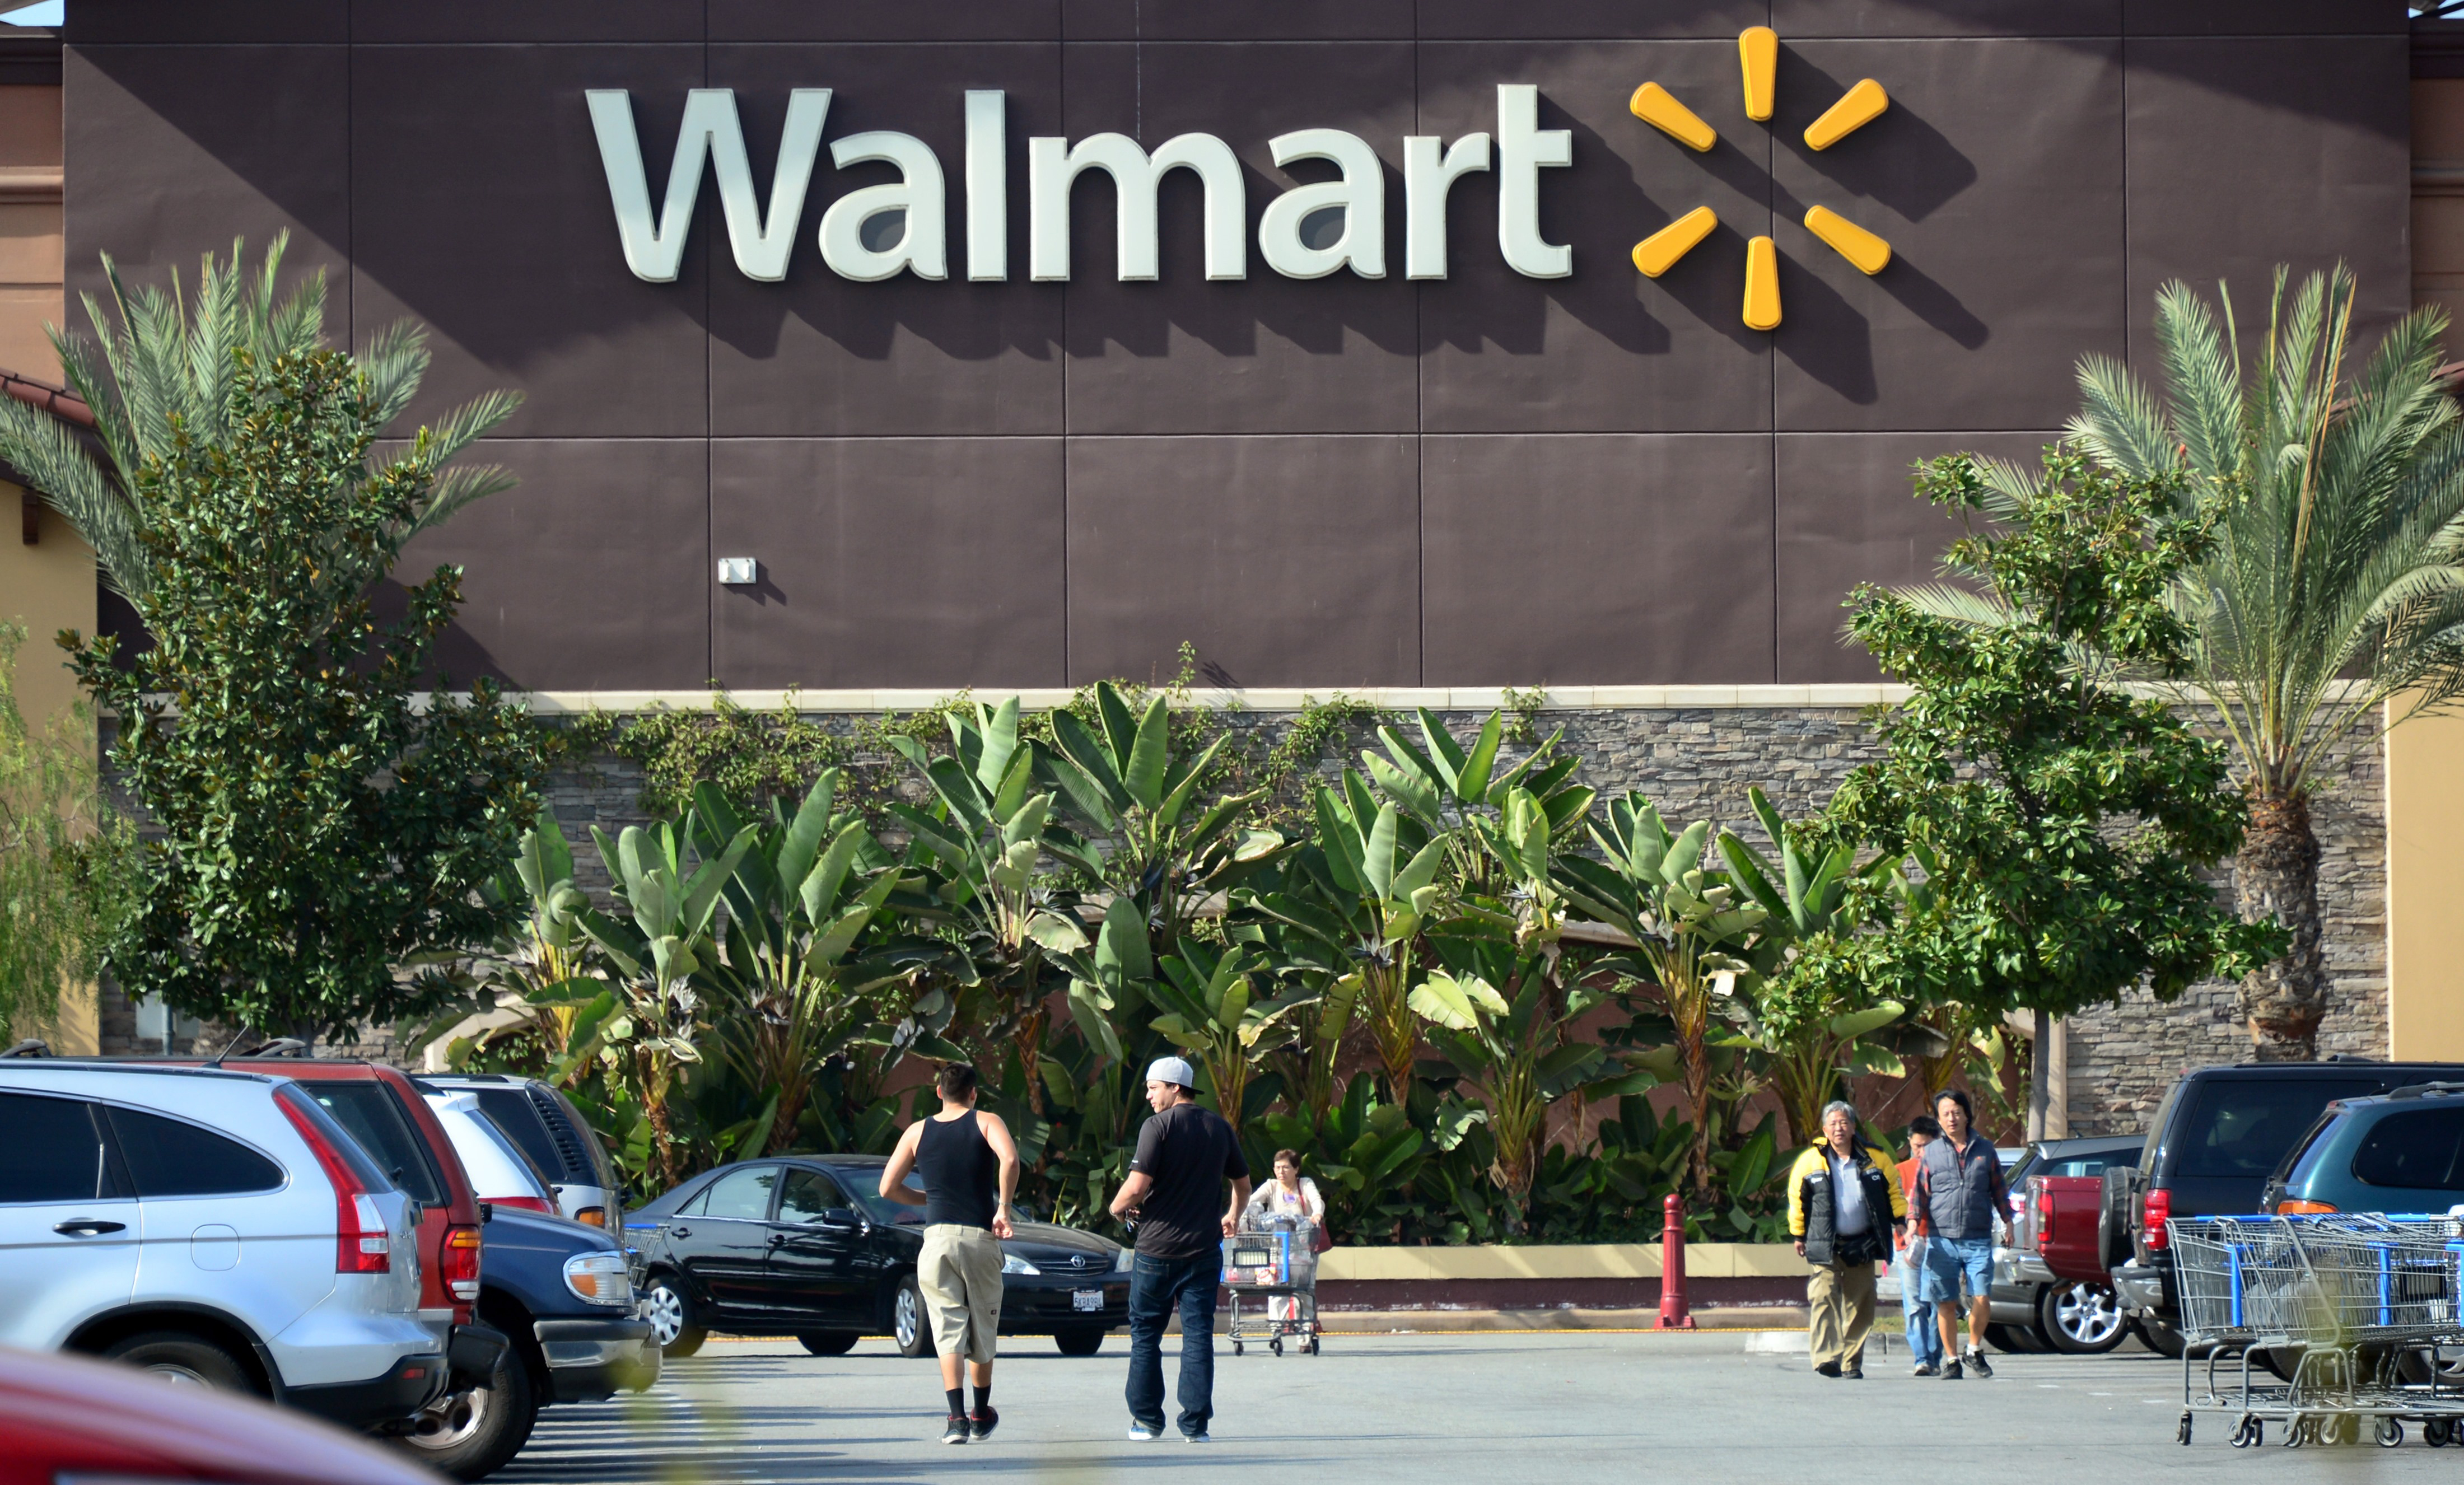 Shoppers are seen outside a Walmart store in Rosemead, Calif. on Jan. 29, 2014. (Frederic J. Brown—AFP/Getty Images)